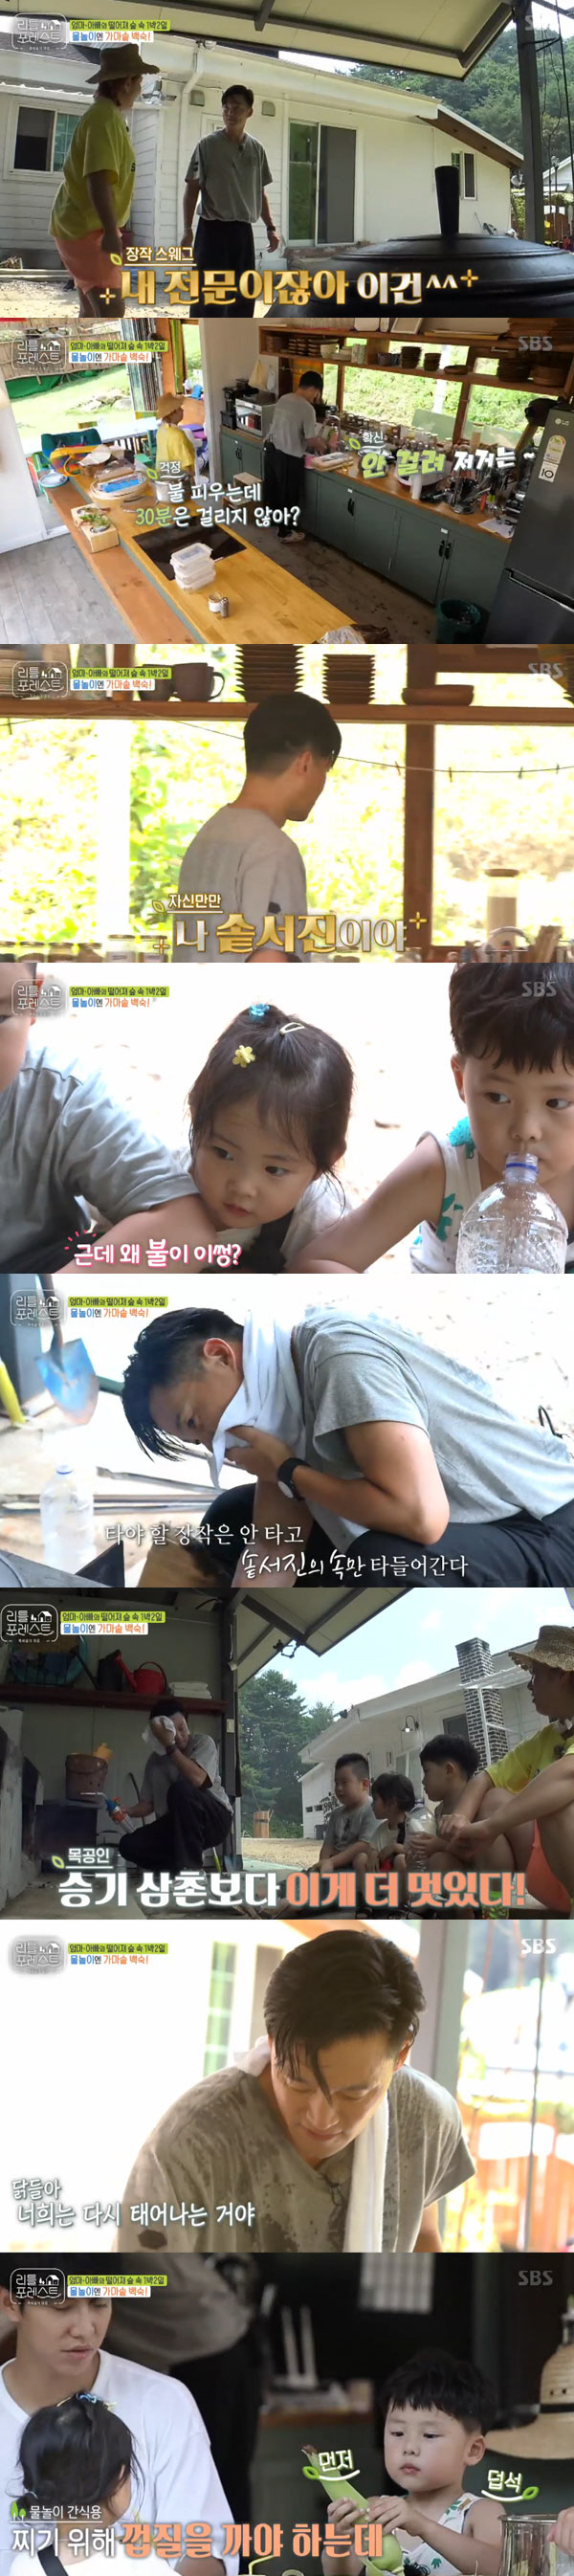 Little Forest Lee Seo-jin, Lee Seung-gi, Park Na-rae and Jung So-min had a good time with Little.On the 2nd broadcast SBS Little Forest: Summer of the Tick-Buckles (hereinafter referred to as Little Forest), the Valley water play scene of Lee Seo-jin, Lee Seung-gi, Park Na-rae, Jung So-min and Little Lee was released.Lee Seo-jin and Park Na-rae set out to prepare for the summer special Baeksuk for Little.Park Na-rae, who had previously revealed he had chicken phobias, told me about cooking tips instead of touching raw chickens.Lee Seo-jin transformed into a cooking bot Lee Seo-jin who was manipulated by action according to Park Na-raes instructions.Lee Seo-jin stepped out confidently to set fire to the fireplace where he would boil the cauldron white-cooked rice.Asked by Park Na-rae, Can you light up? Lee Seo-jin said, Its my specialty. Its not going to take 30 minutes.However, Lee Seo-jin, who struggled with sweating in unexpected heat waves and sweated in the first attempt, succeeded in the second attempt.Lee said, This is cooler than the win The Uncle, and Lee Seo-jin smiled proudly.At that time Lee Seo-jin is sweating and preparing for Baek Sook, Little Lee peels to steam corn directly from the garden.At this time, Lee Han was in agony for shaking again, and Lee Seung-gi said, If you pick it with corn, it is the first time in Korea.You can boast to the Friends that you have pulled your teeth with corn hair. However, Lee refused to draw this fear.In the end, he got into the car toward the water play without pulling his teeth. First, Lee Han started eating boiled corn.At the time of eating corn to avoid the shaking, Lee saw something, and soon cheered, I ate corn and fell out.Lee Seung-gi and Lee Seo-jin laughed greatly.Little people who arrived at Valley were surprised by the preparations themselves before entering the water.Other Littles had a good time in the water, while Eugeney felt fearful of the water; but he was encouraged by the appearance of other Friends and succeeded in getting himself into the water.At that time, Lee Seo-jin showed off his previous lung capacity by constantly blowing wind into the constant tube orders of Little.Especially Eugenei fell into the water trying to ride a frog tube, and Jung So-min reached out and held Eugenei. Eugene was surprised but did not cry briskly.Jung So-min said, It was embarrassing. I thought I should not panic. I told him it was okay.Thats important, he said, then realised.While enjoying the water play, Lee Seung-gi proposed the game, and Little people chose the team directly, and the popular vote of the members naturally proceeded.Lee Han-yi picked Park Na-rae, Kim Jin-hee picked Lee Seung-gi, Brooke and Grace, and Eugene picked Jung So-min.At that time, Lee said, I will do with the winner The Uncle, and Park Na-rae was embarrassed.Jung So-min said, I am so happy, but I am sorry for my sisters.After a full-scale water play, lunchtime. Little boys showed off storm chicken food as if they were hungry for water play.Its the prettiest time to eat well from a food standpoint - just seeing is a pleasure, Lee Seo-jin said.After finishing the meal, Lee Han-i and Kim Jin-hee left the watermelon tube, and Lee Seung-gi said, Do not do both.If you take one side, the other side is sick. At that time, Lee said, Ill give you and gave up the tube to my brother, and Lee Seung-gi praised it as this cool mix.On the way home, Littley fell asleep in the car.Lee Seung-gi said, I think my appearance is what I have seen from Father before. I wanted to see Father while making an e-Pro.